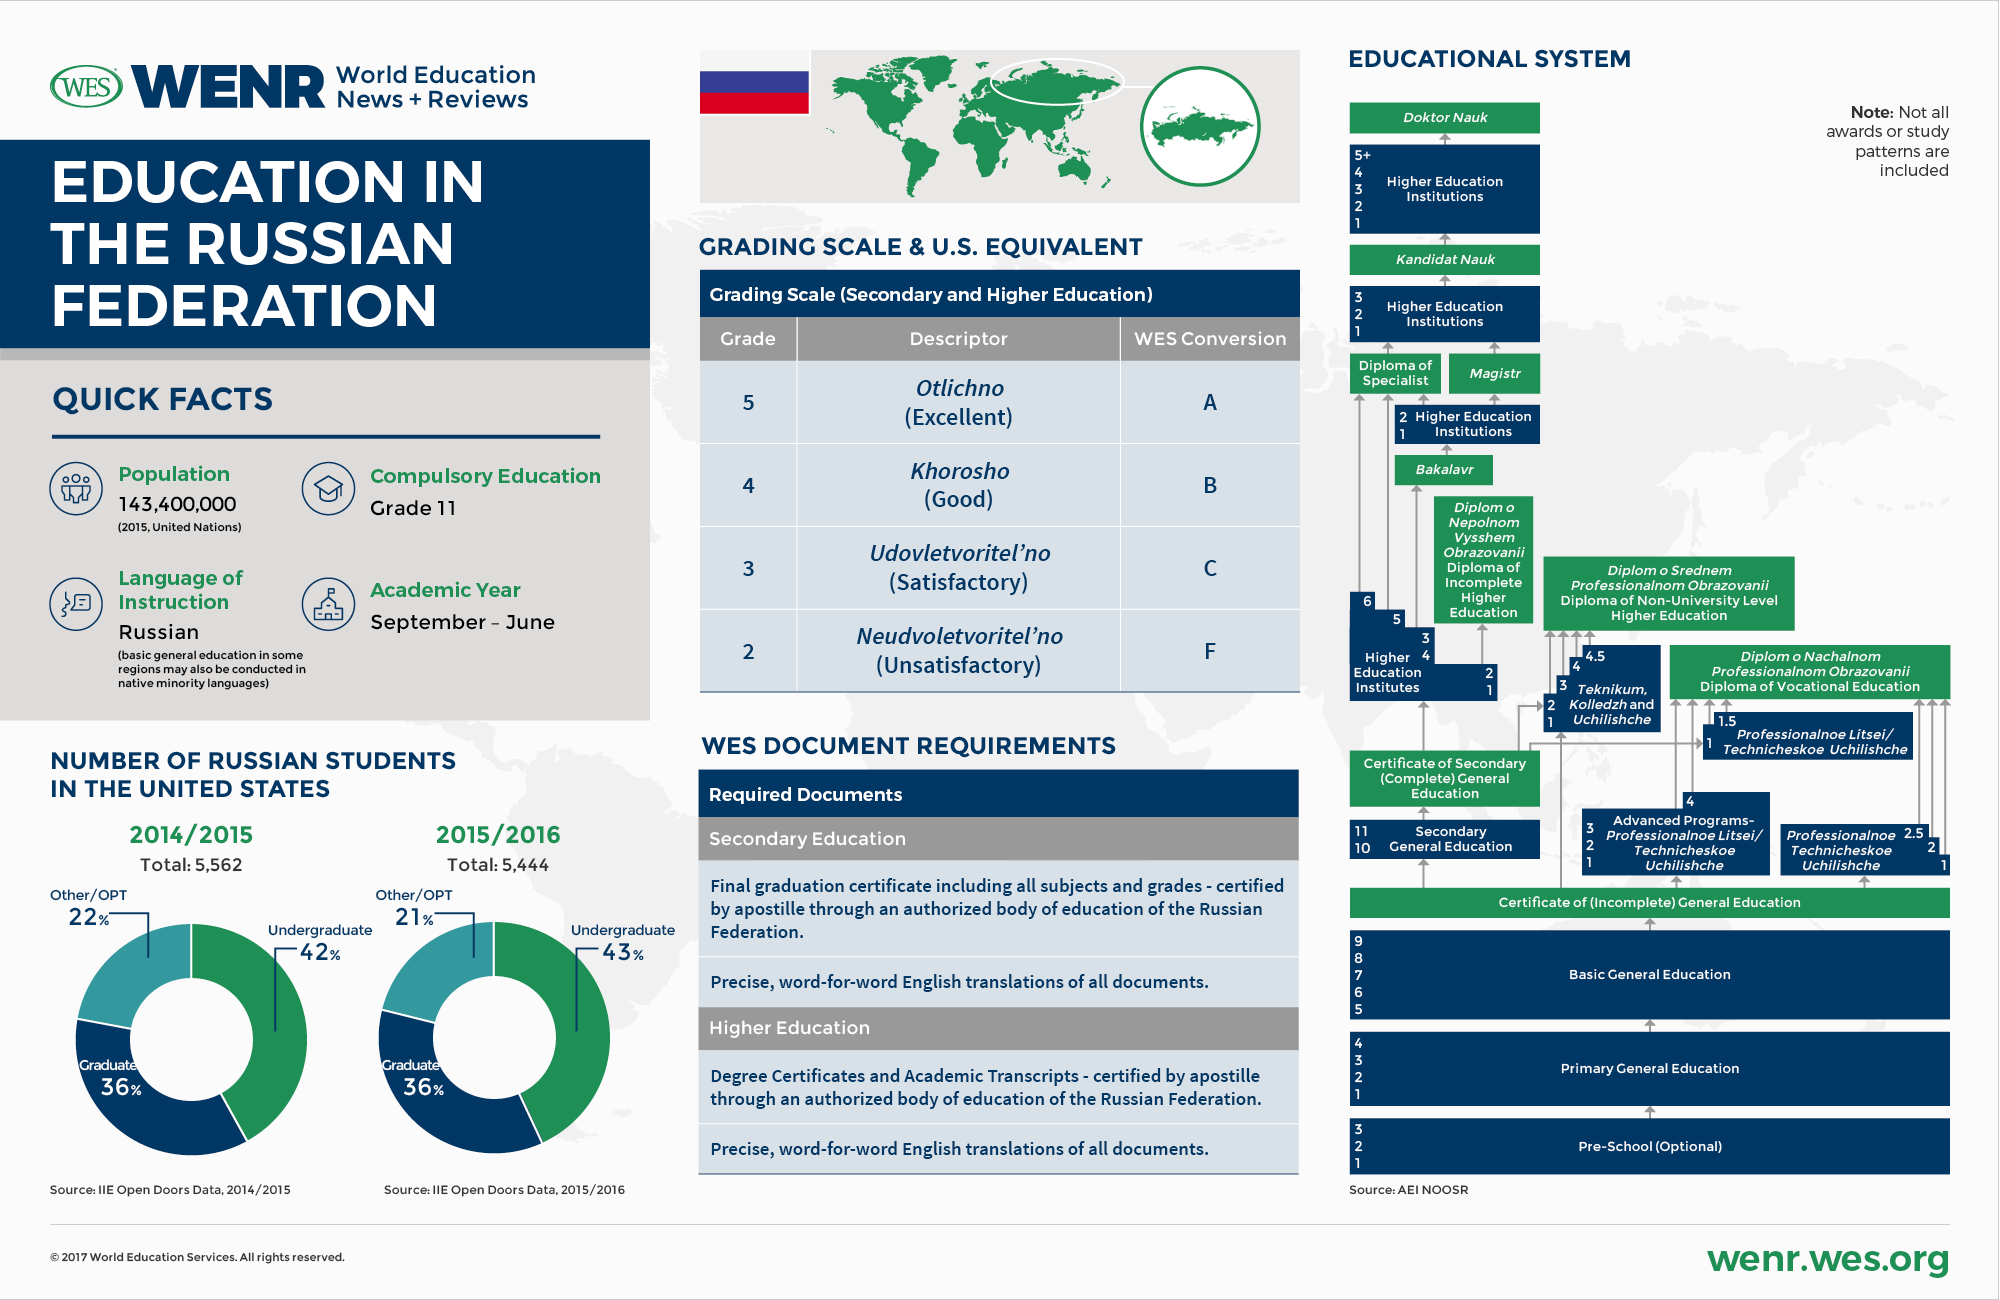 Education in the Russian Federation Infographic: Fast facts on Russia's educational system and international student mobility